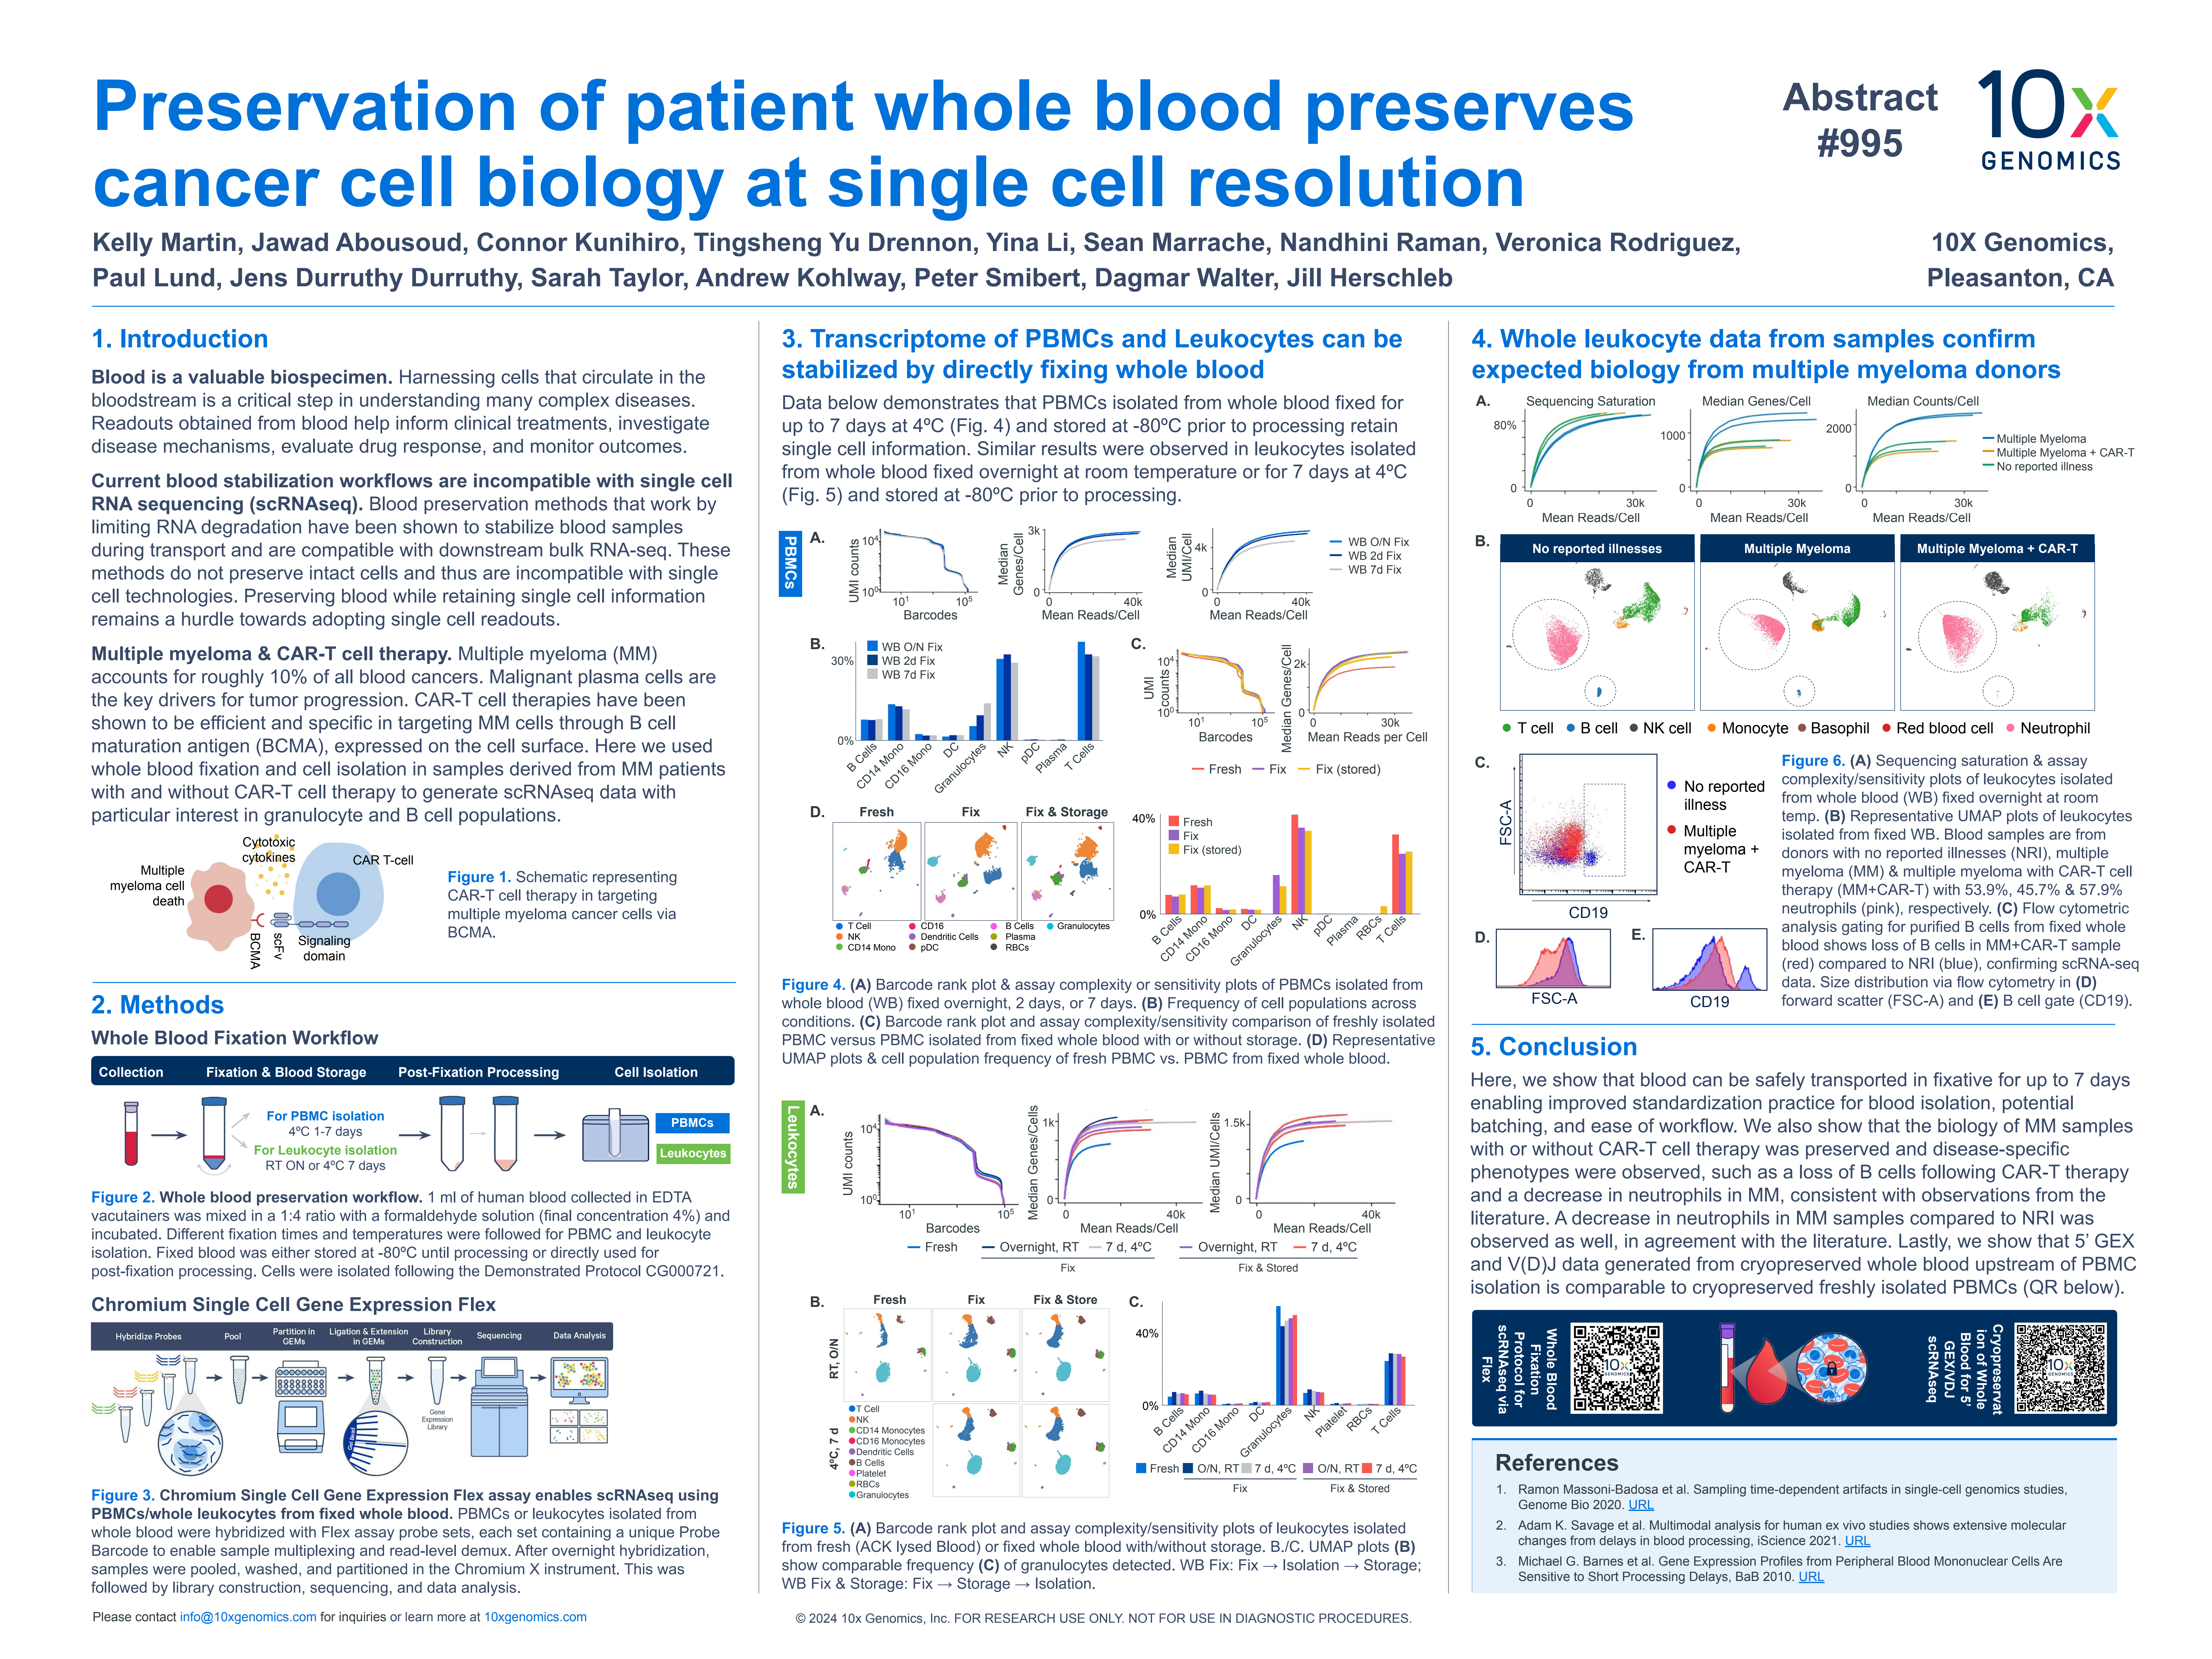 Preservation of patient whole blood preserves cancer cell biology at single cell resolution